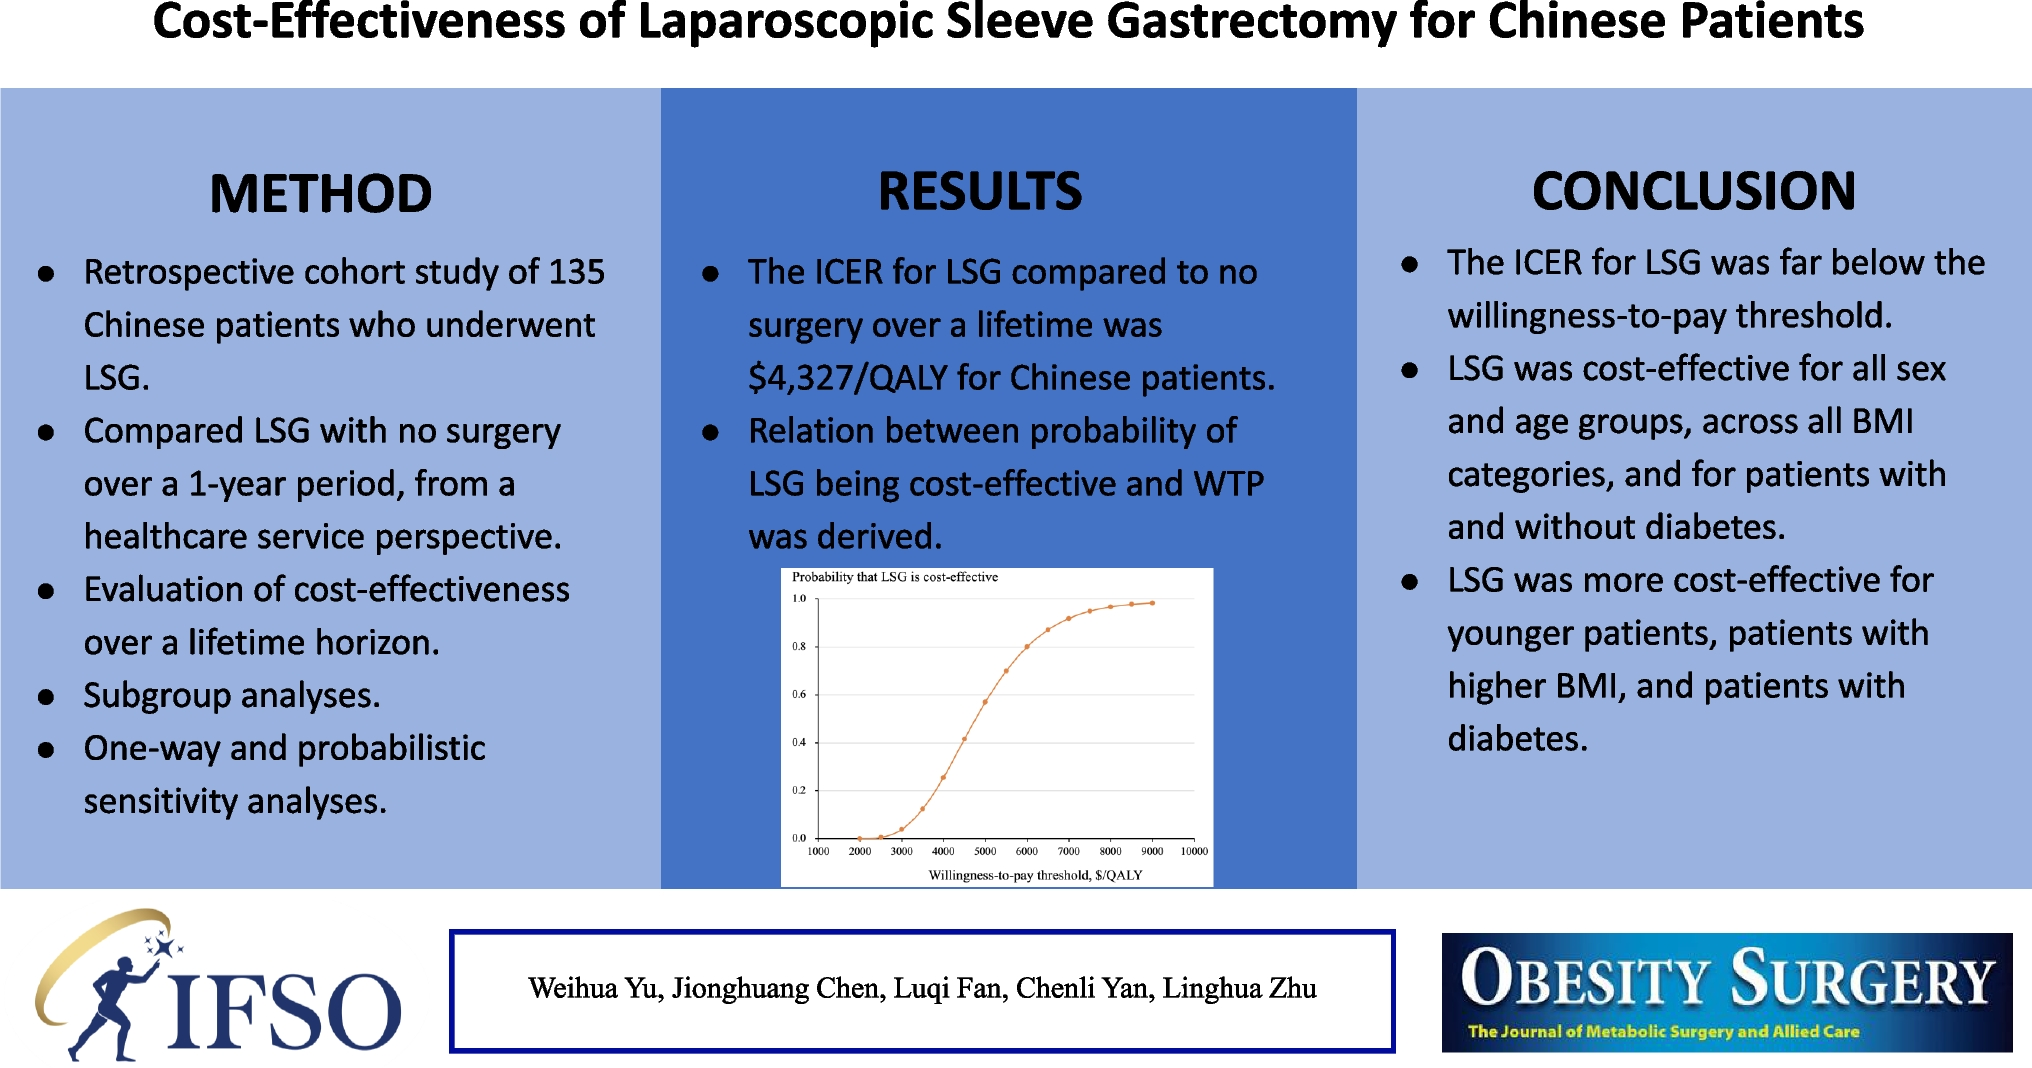 Cost-Effectiveness of Laparoscopic Sleeve Gastrectomy for Chinese Patients